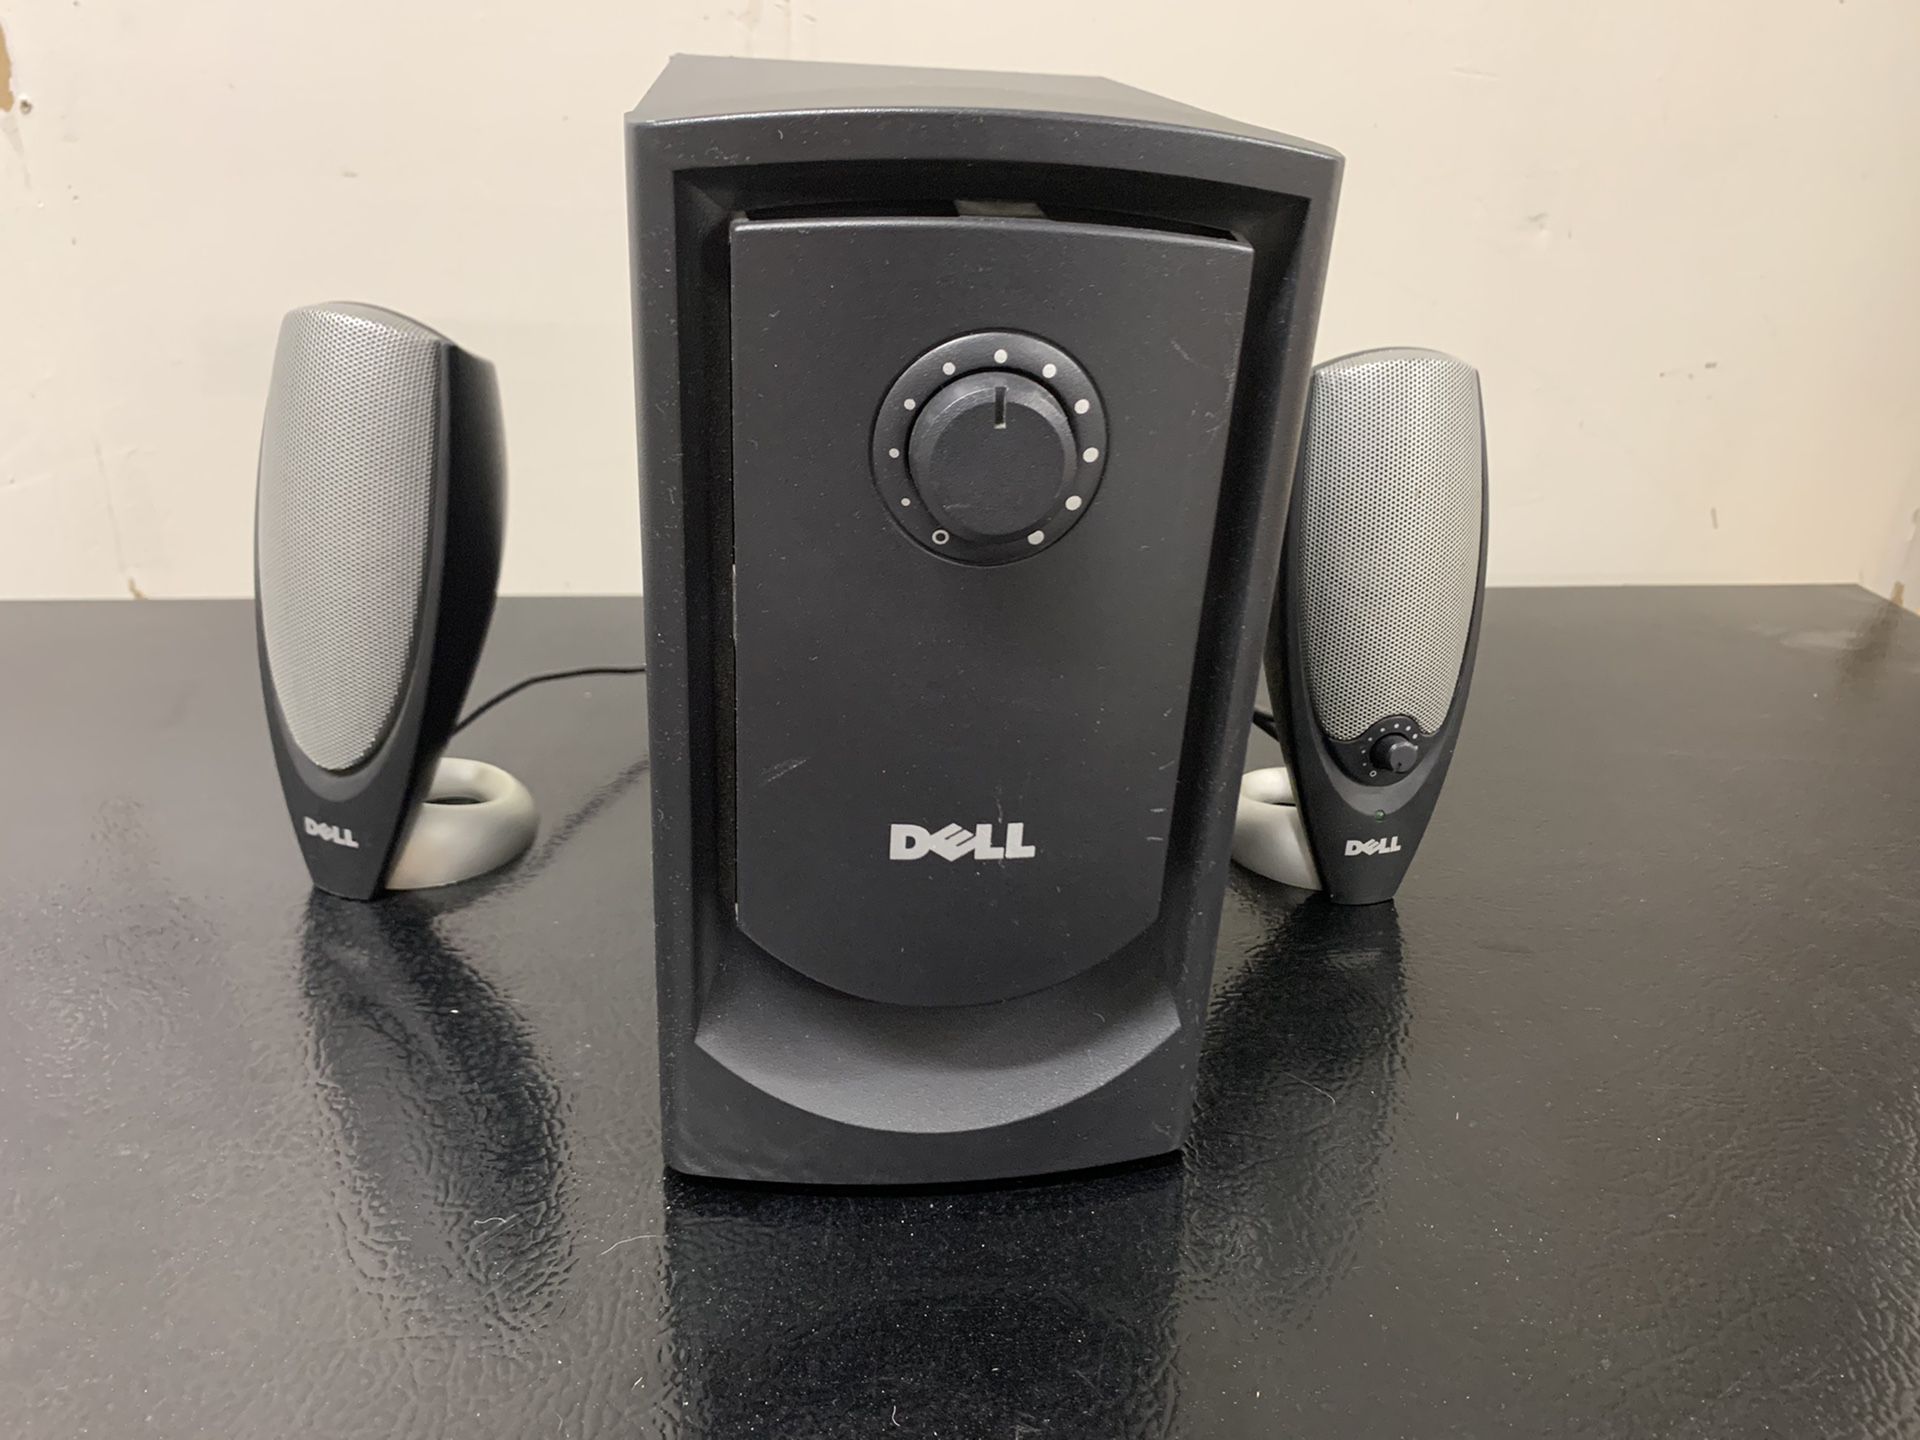 Dell computer speakers with subwoofer